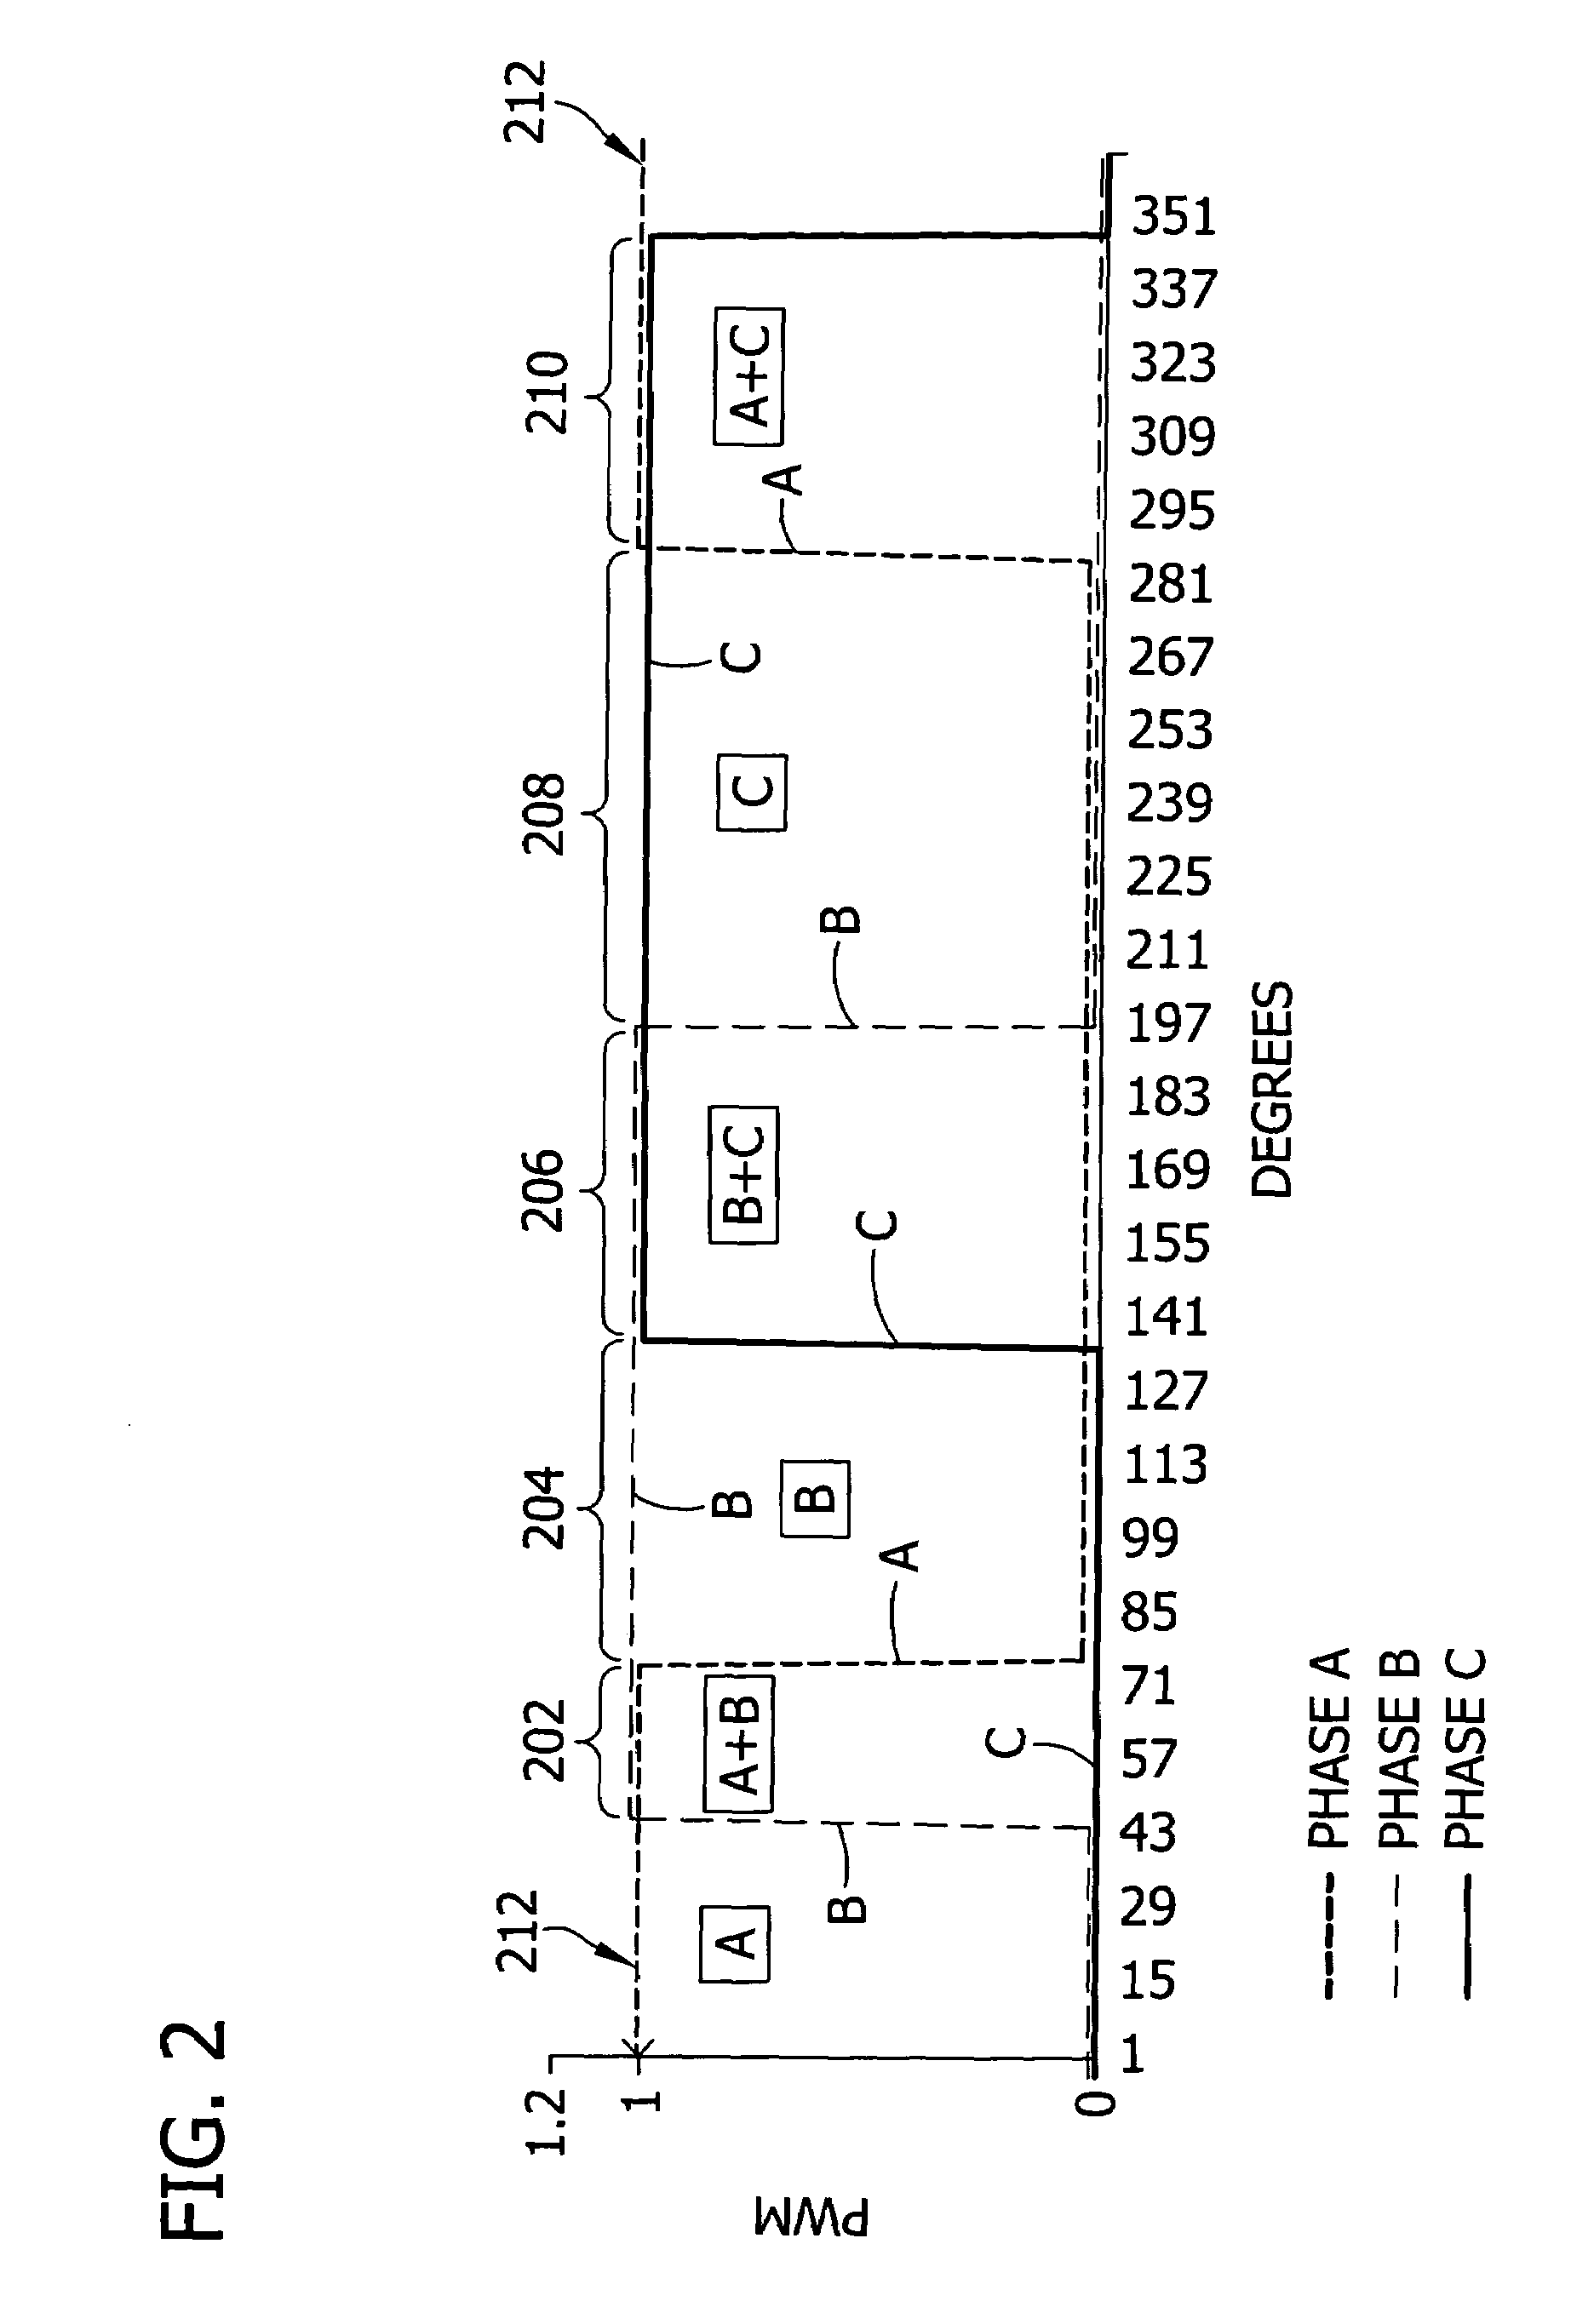 Offset PWM signals for multiphase motor